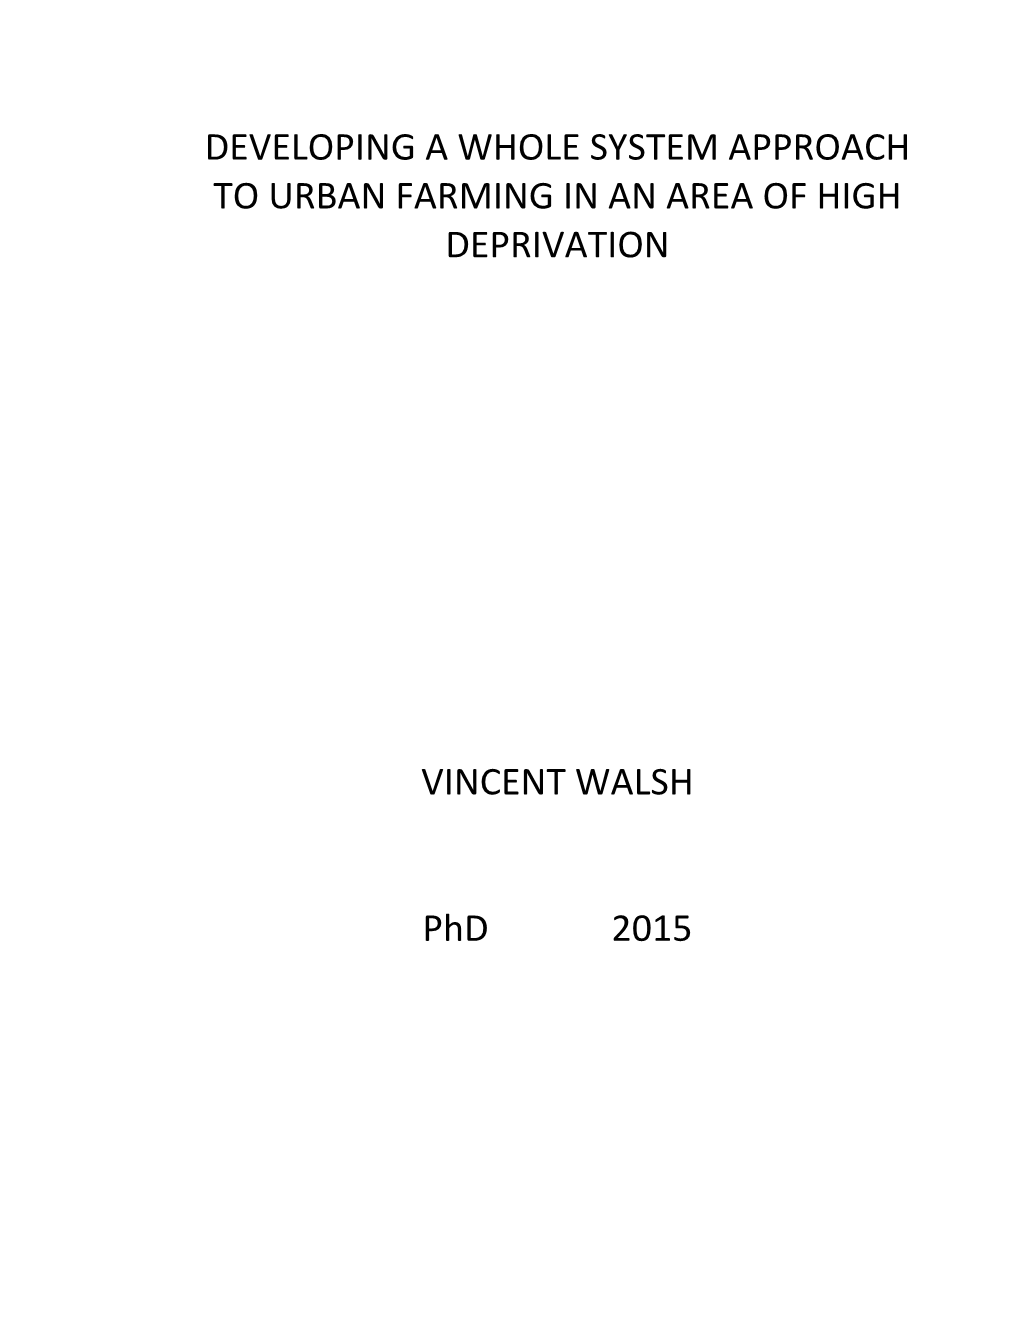 Developing a Whole System Approach to Urban Farming in an Area of High Deprivation